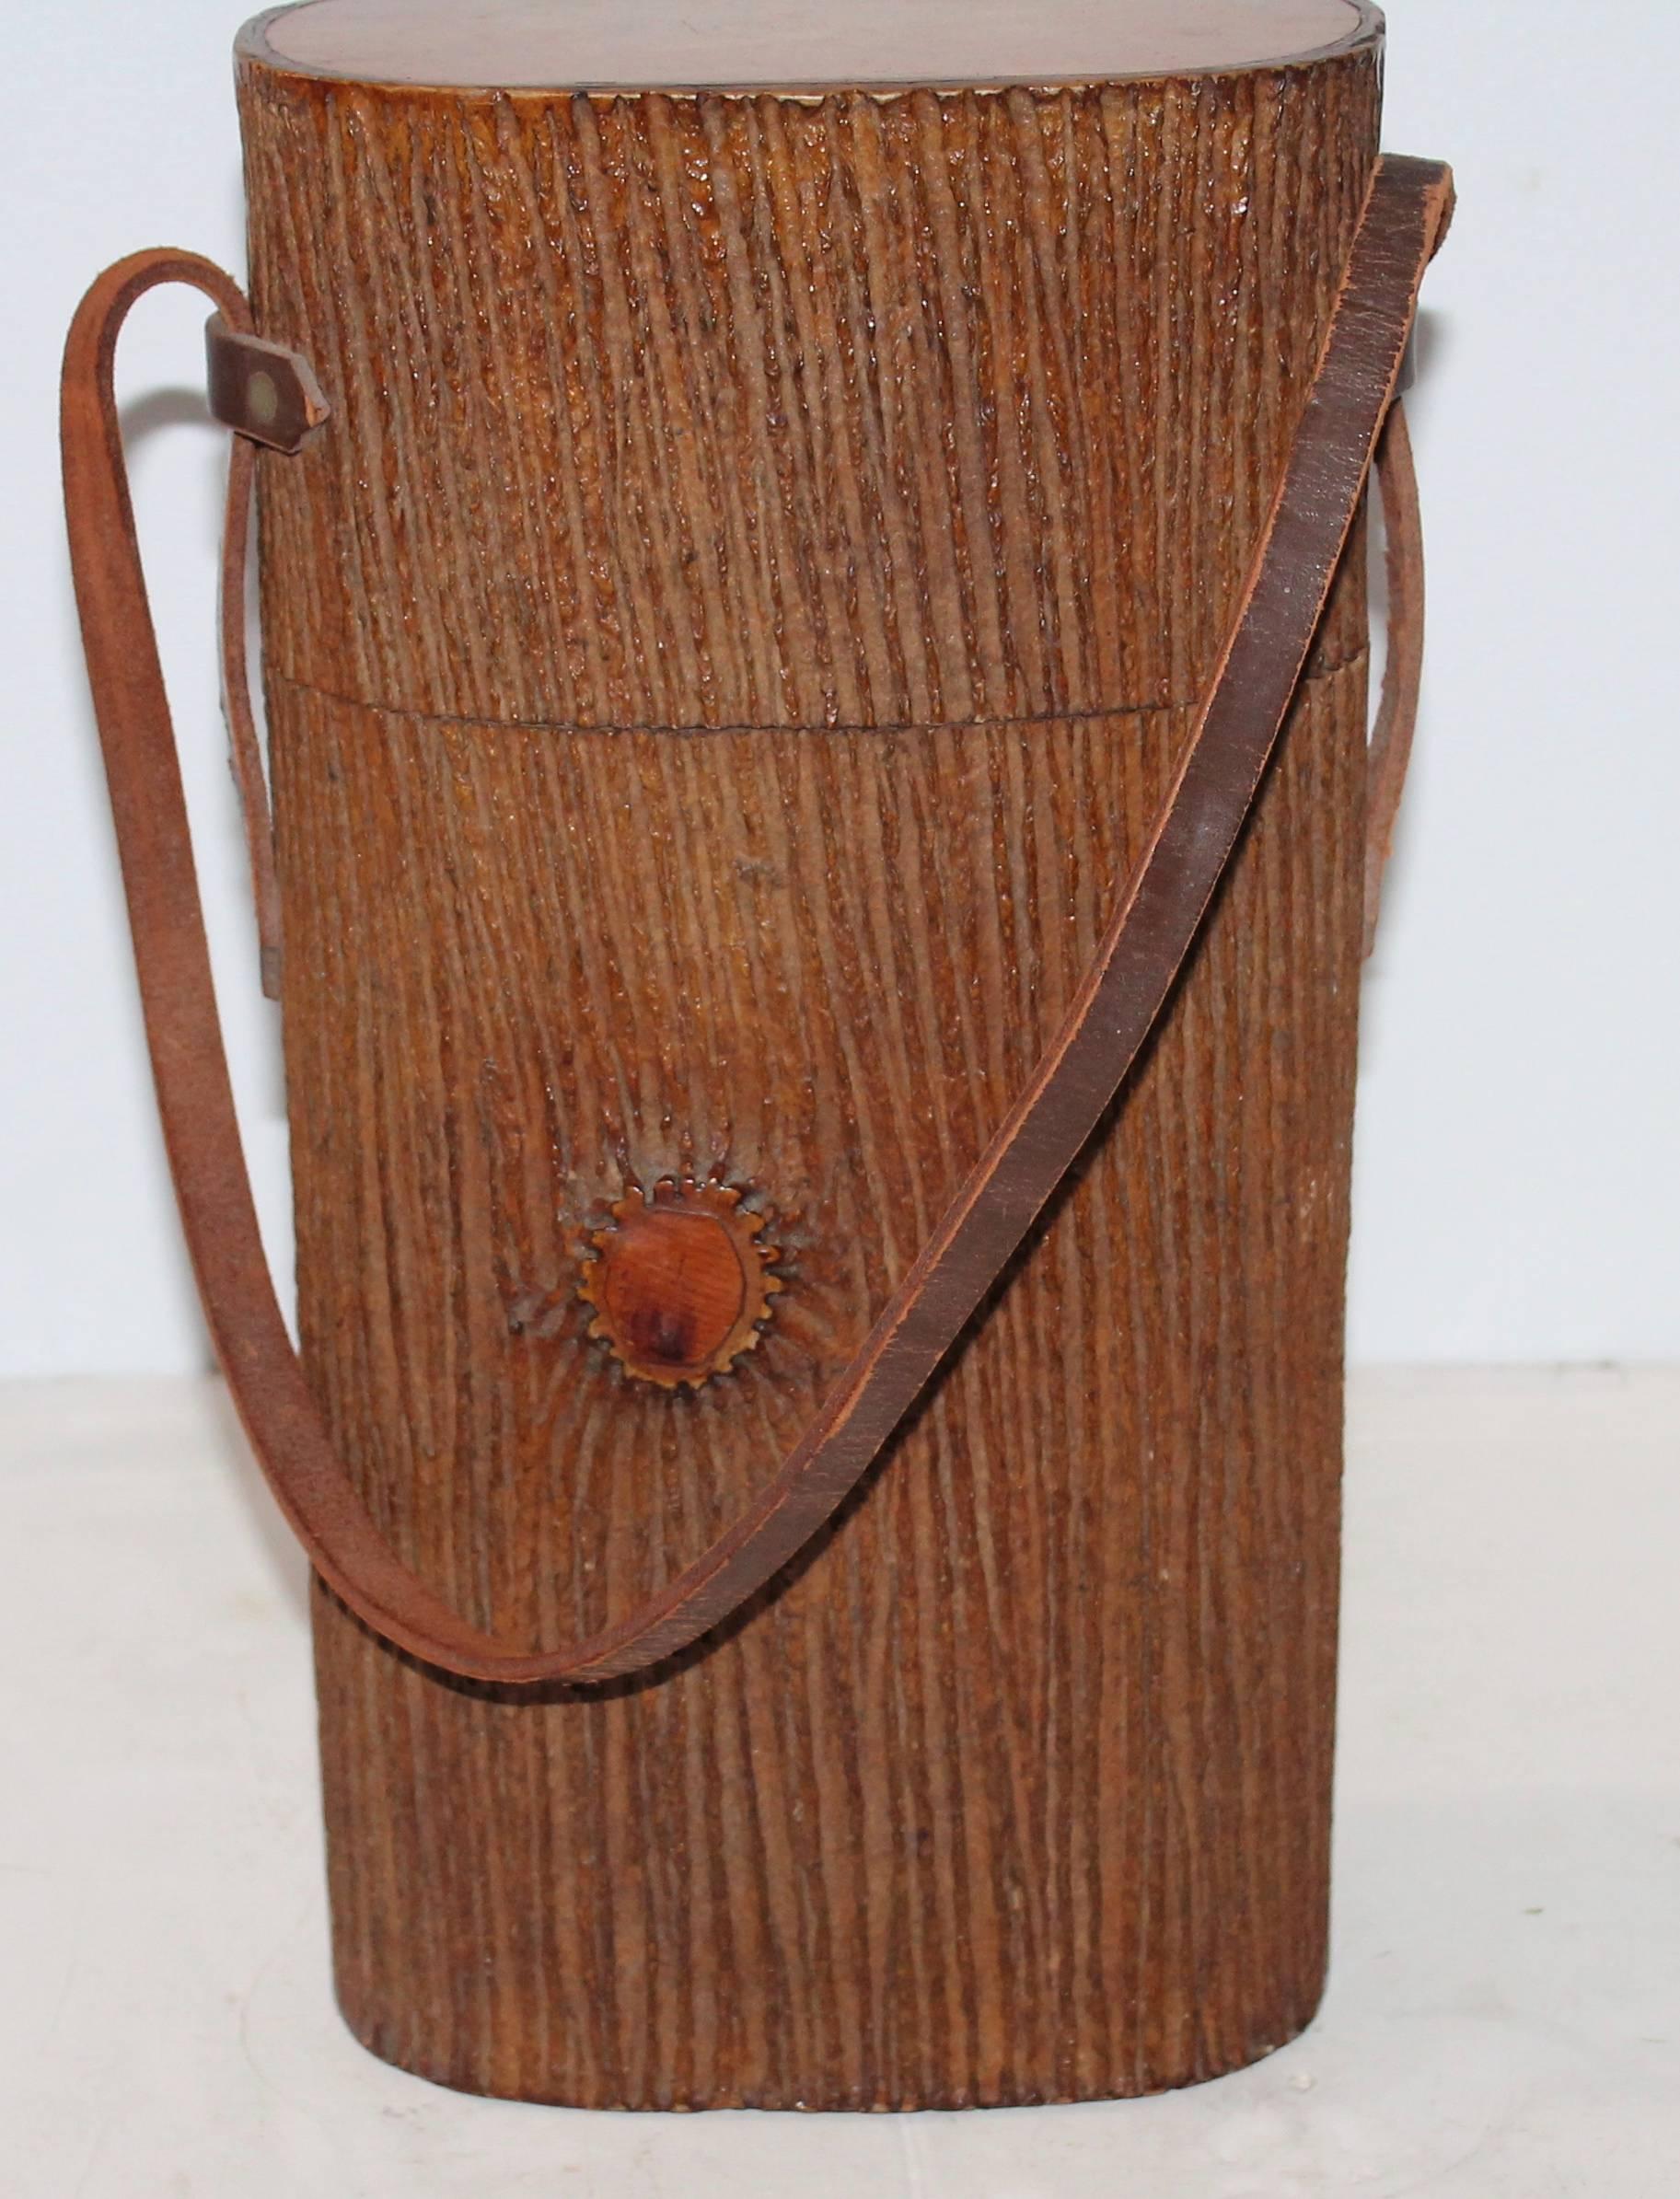 This large handmade leather and wood bark covered shoulder bag or humidor has a leather strap and wood top and base. The entire bag is covered in a bark and wood notts. The condition is very good. It is also covered in the original varnish surface.